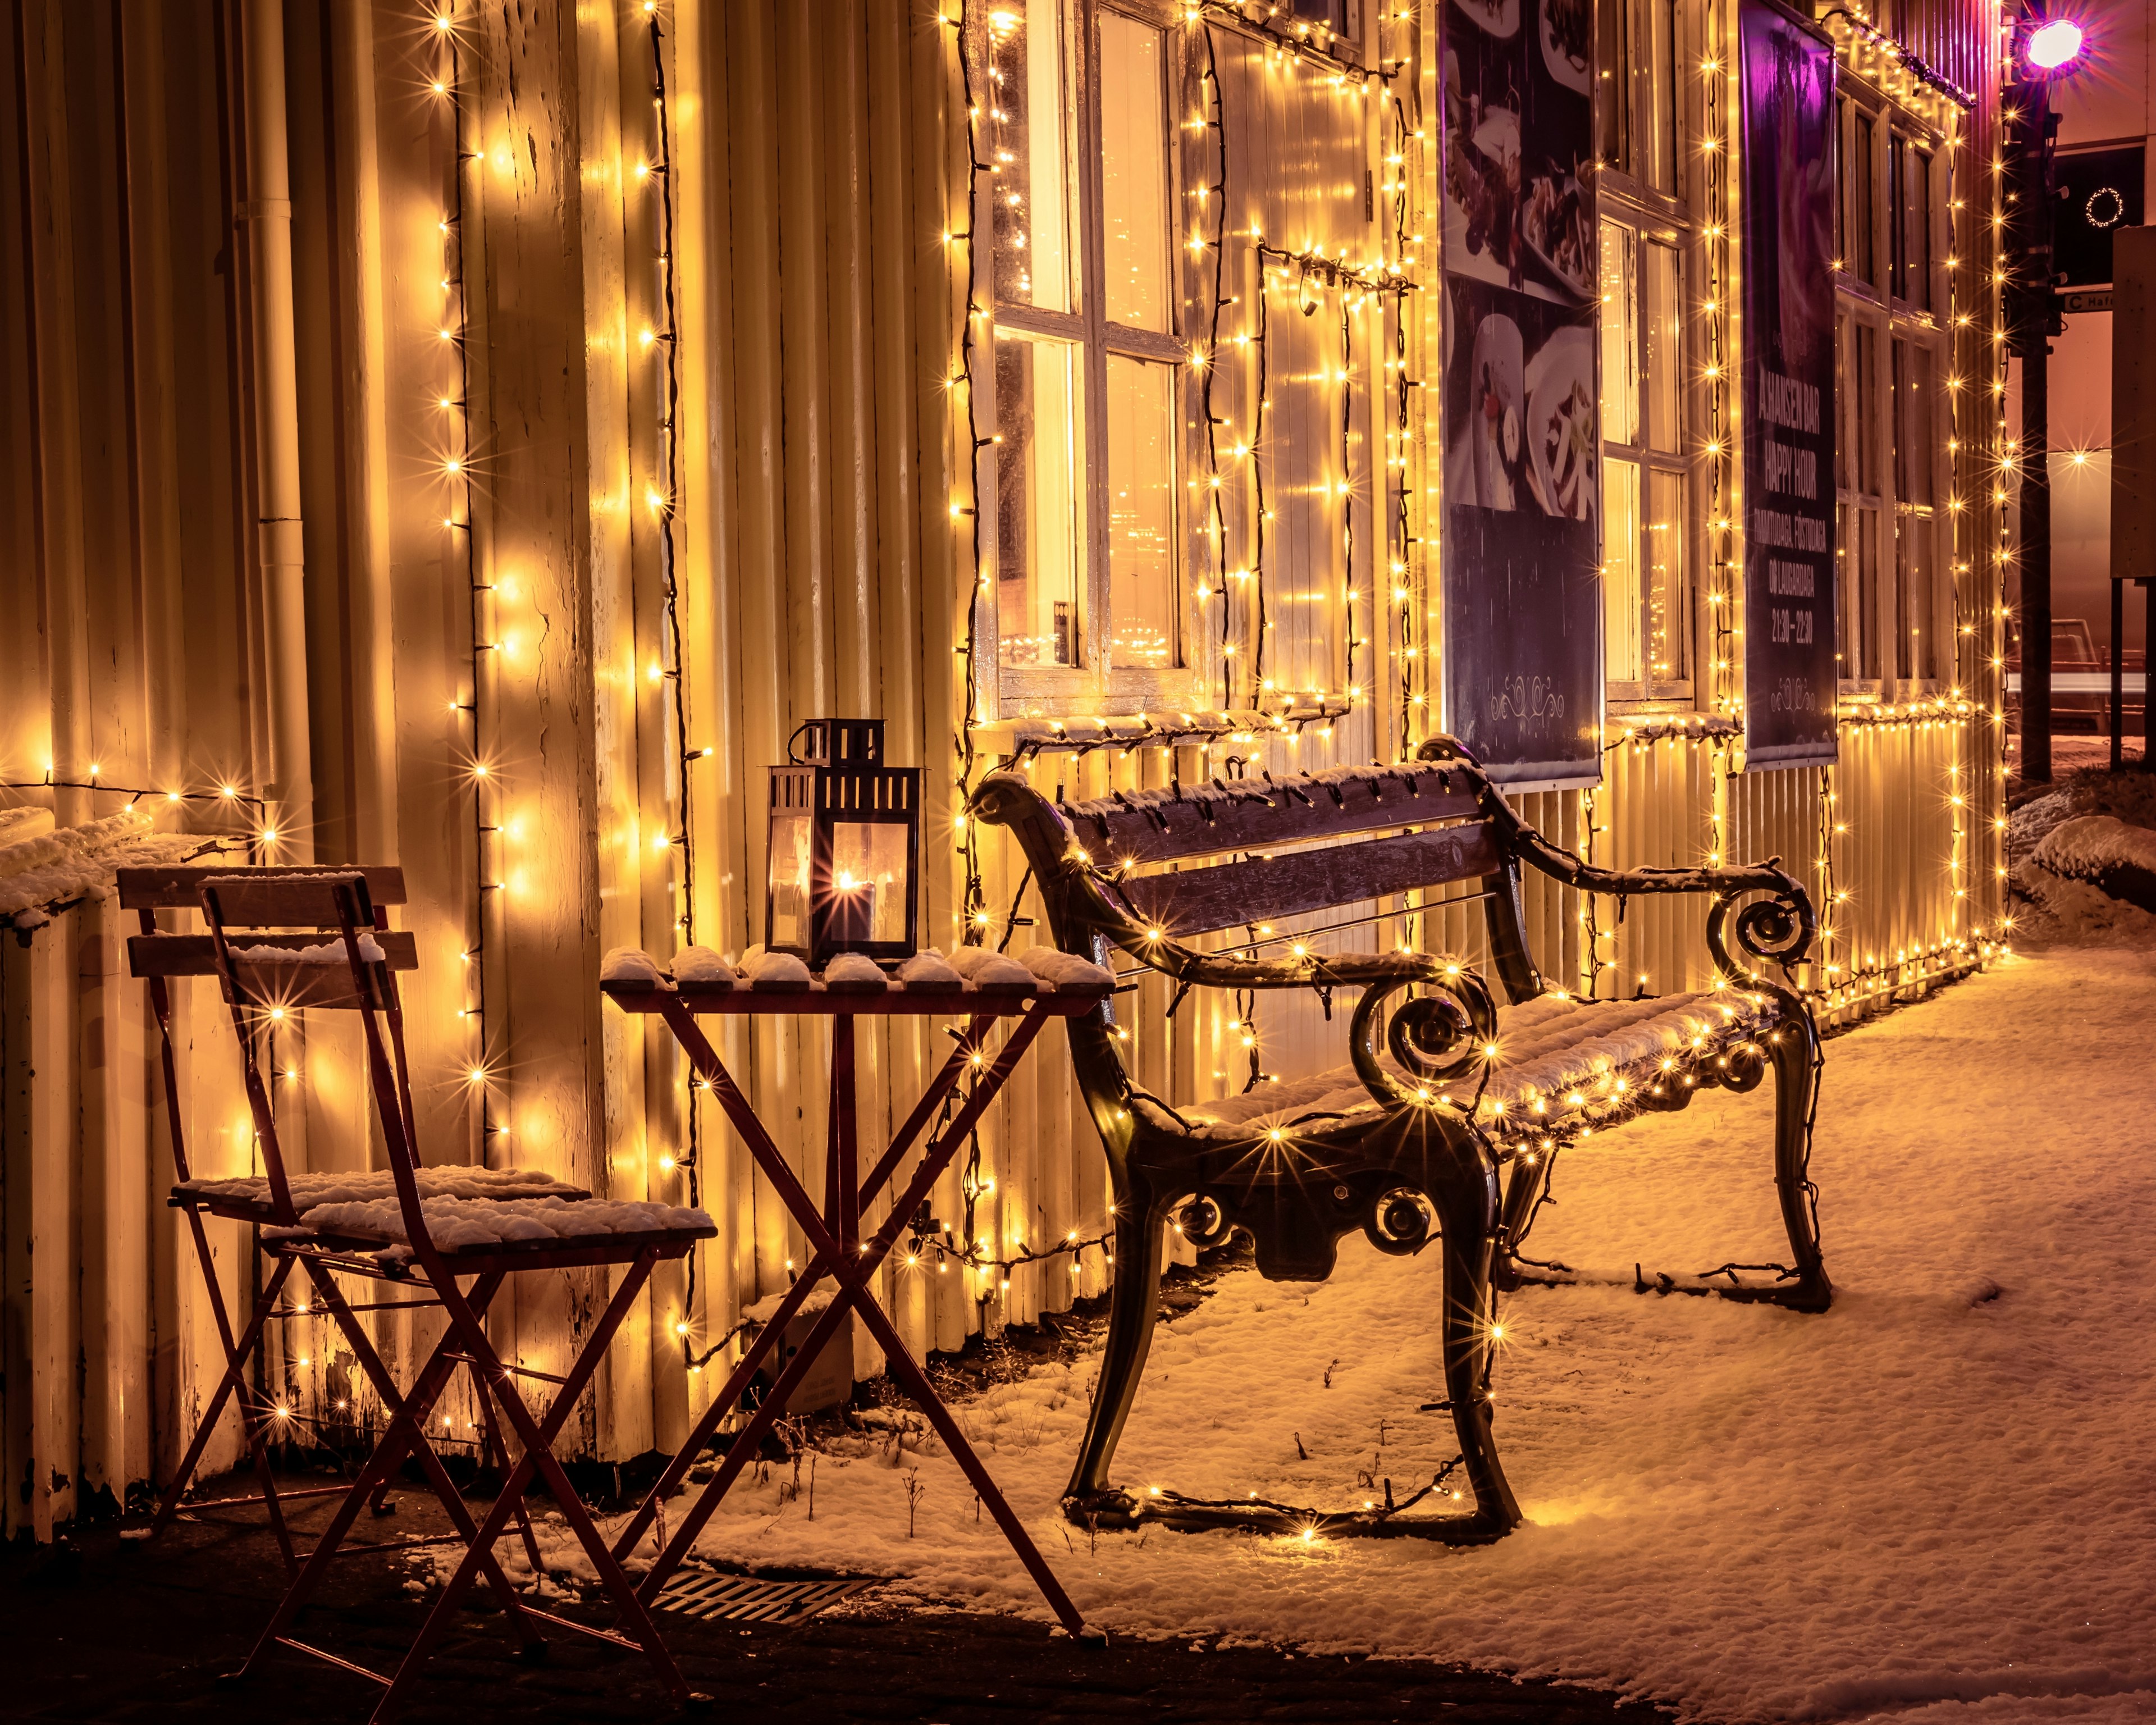 Christmas lights on a house and bench in Iceland